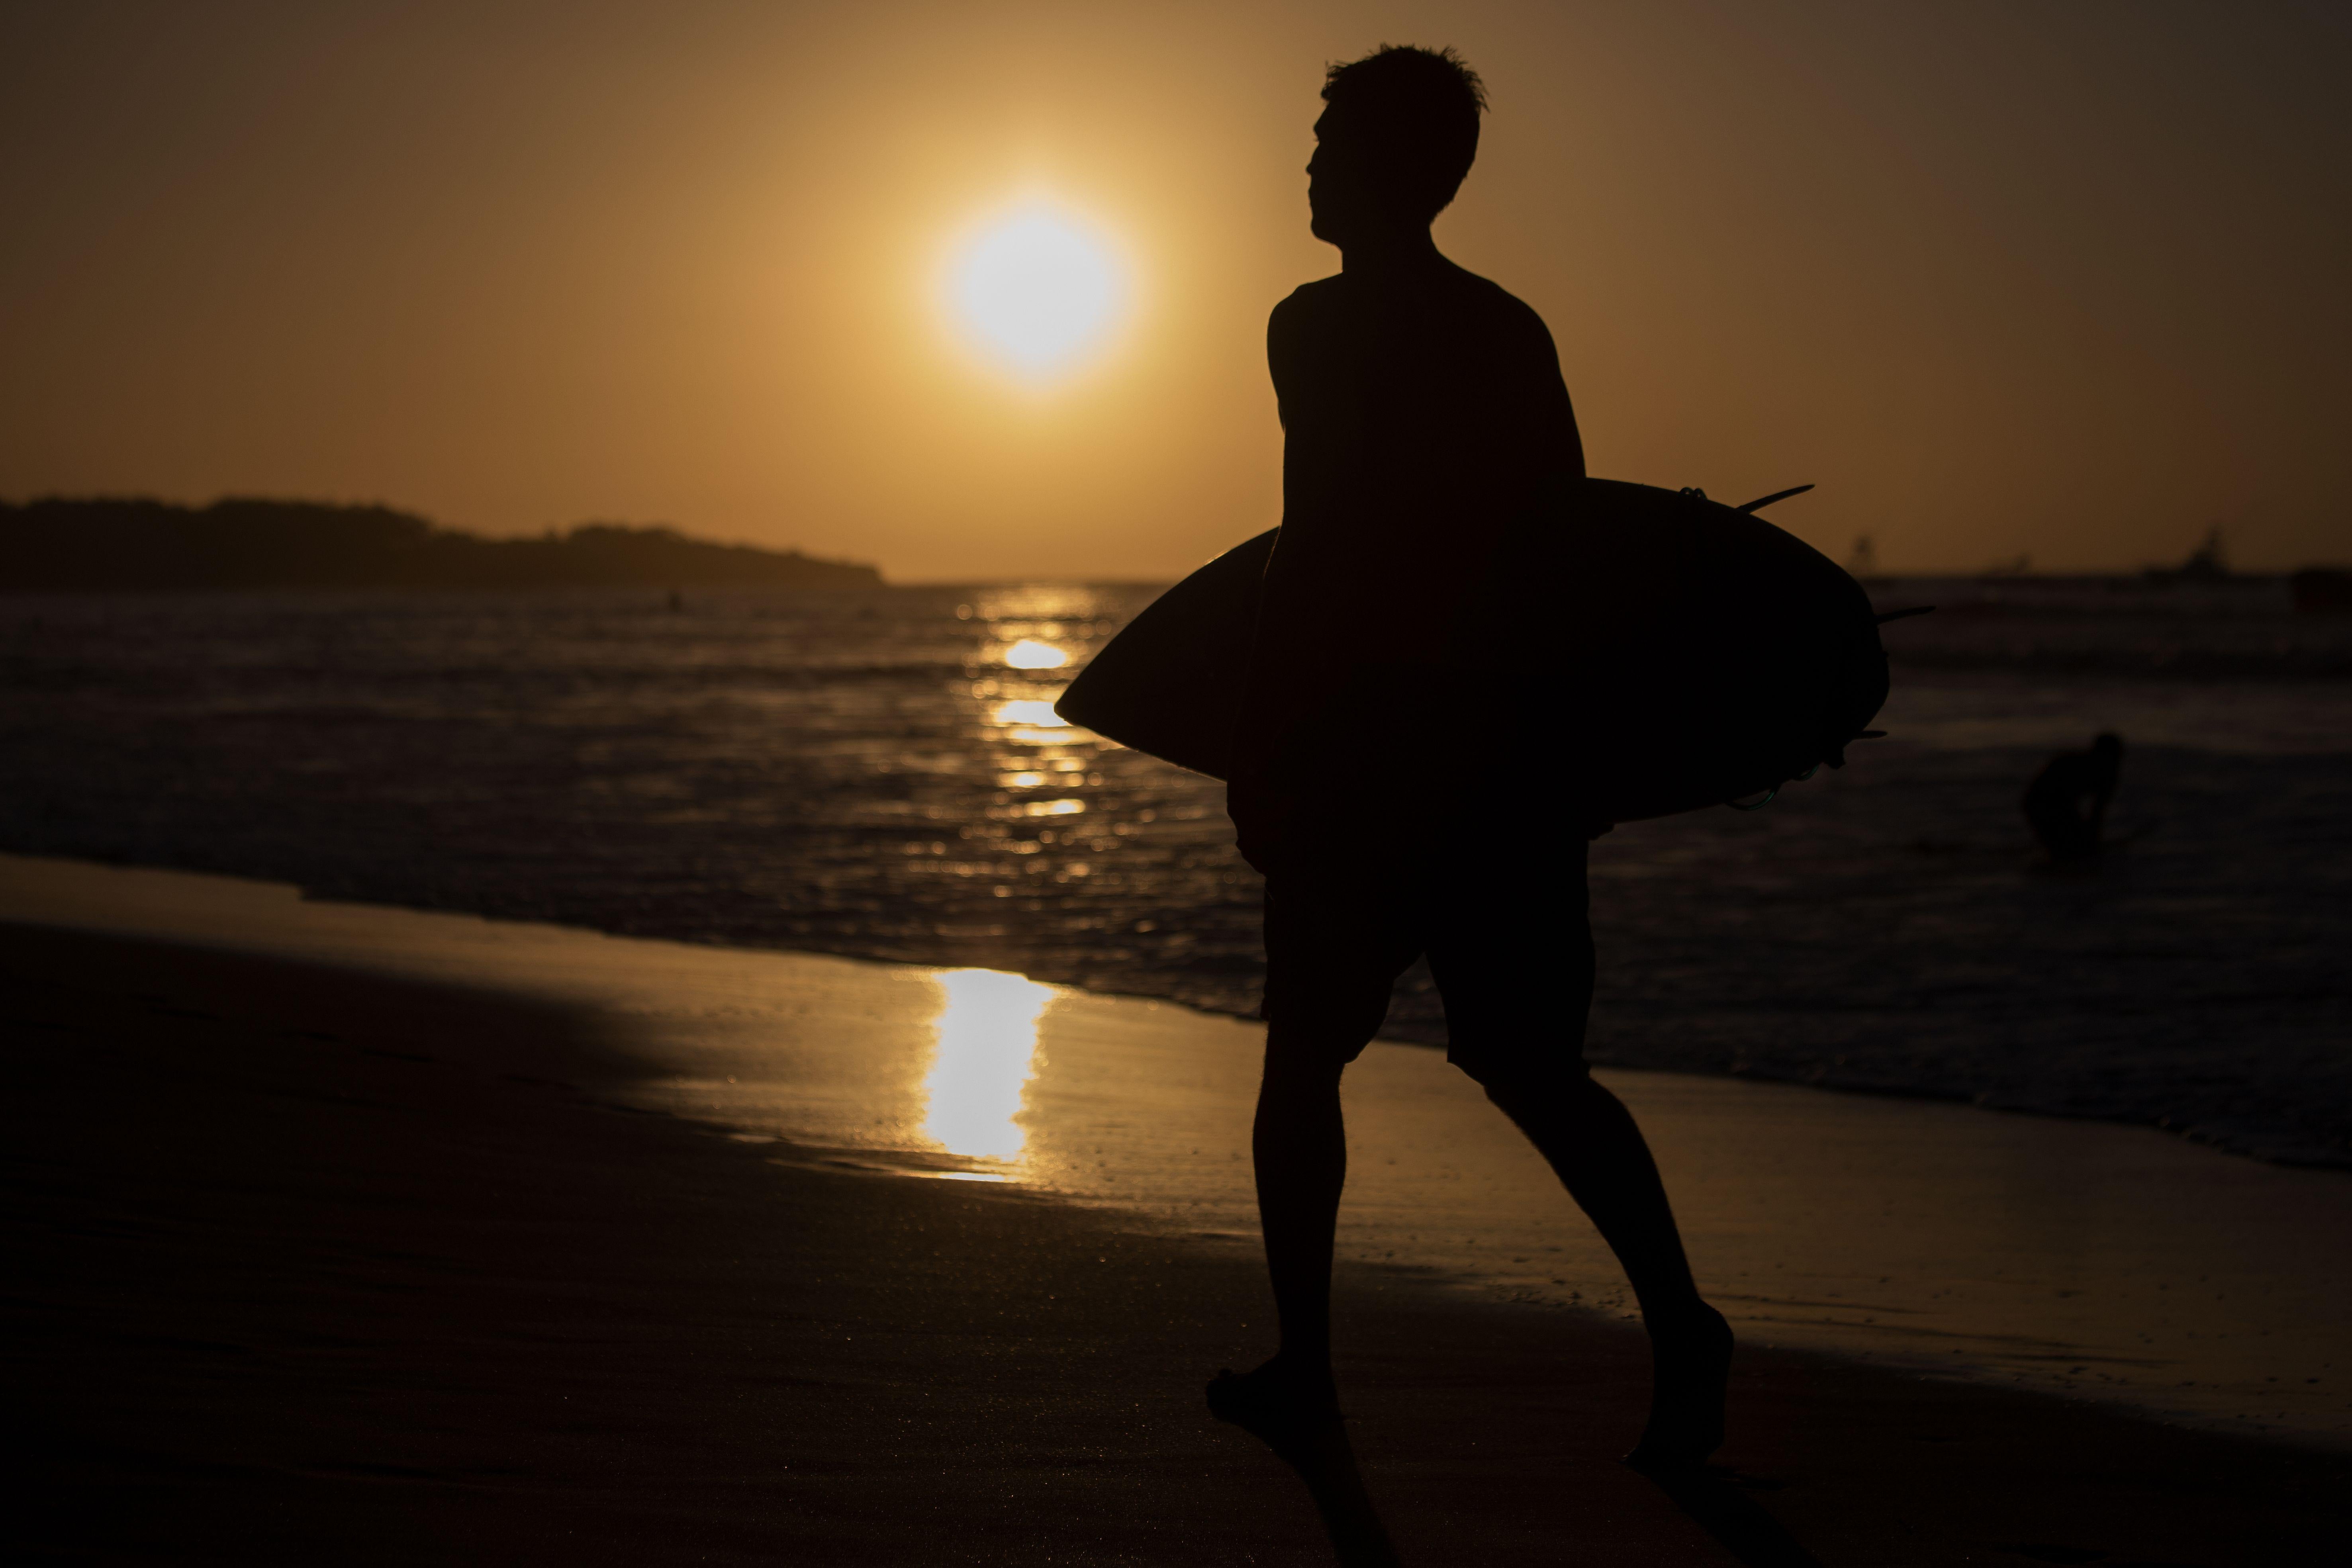 A man carries a surfboard as he walks past the setting sun at the beach in Tamarindo, Costa Rica on December 12, 2018. 